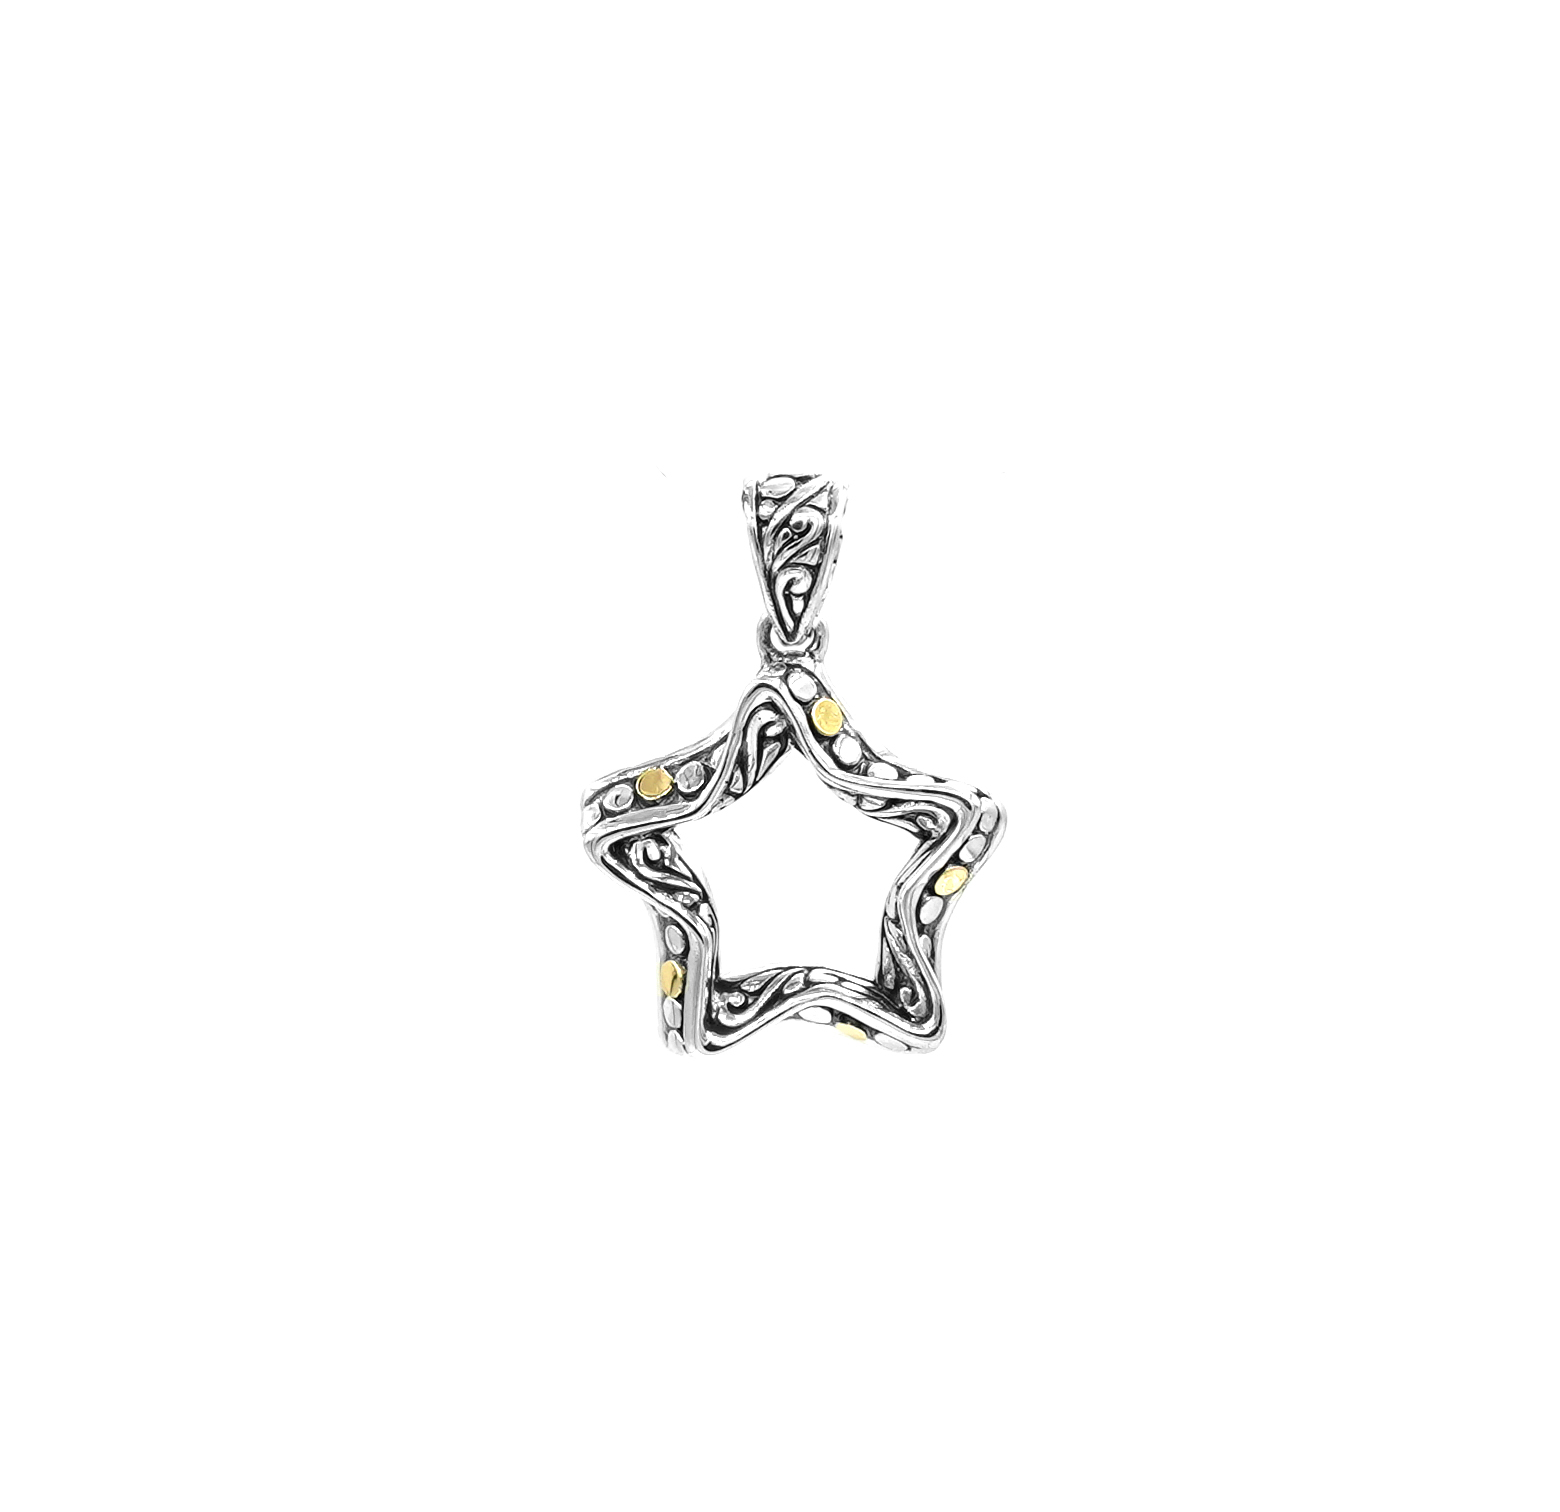 SAMUEL B COLLECTION STERLING SILVER & 18K YELLOW GOLD DOT TWINKLE STAR PENDANT  (3.70 GRAMS)